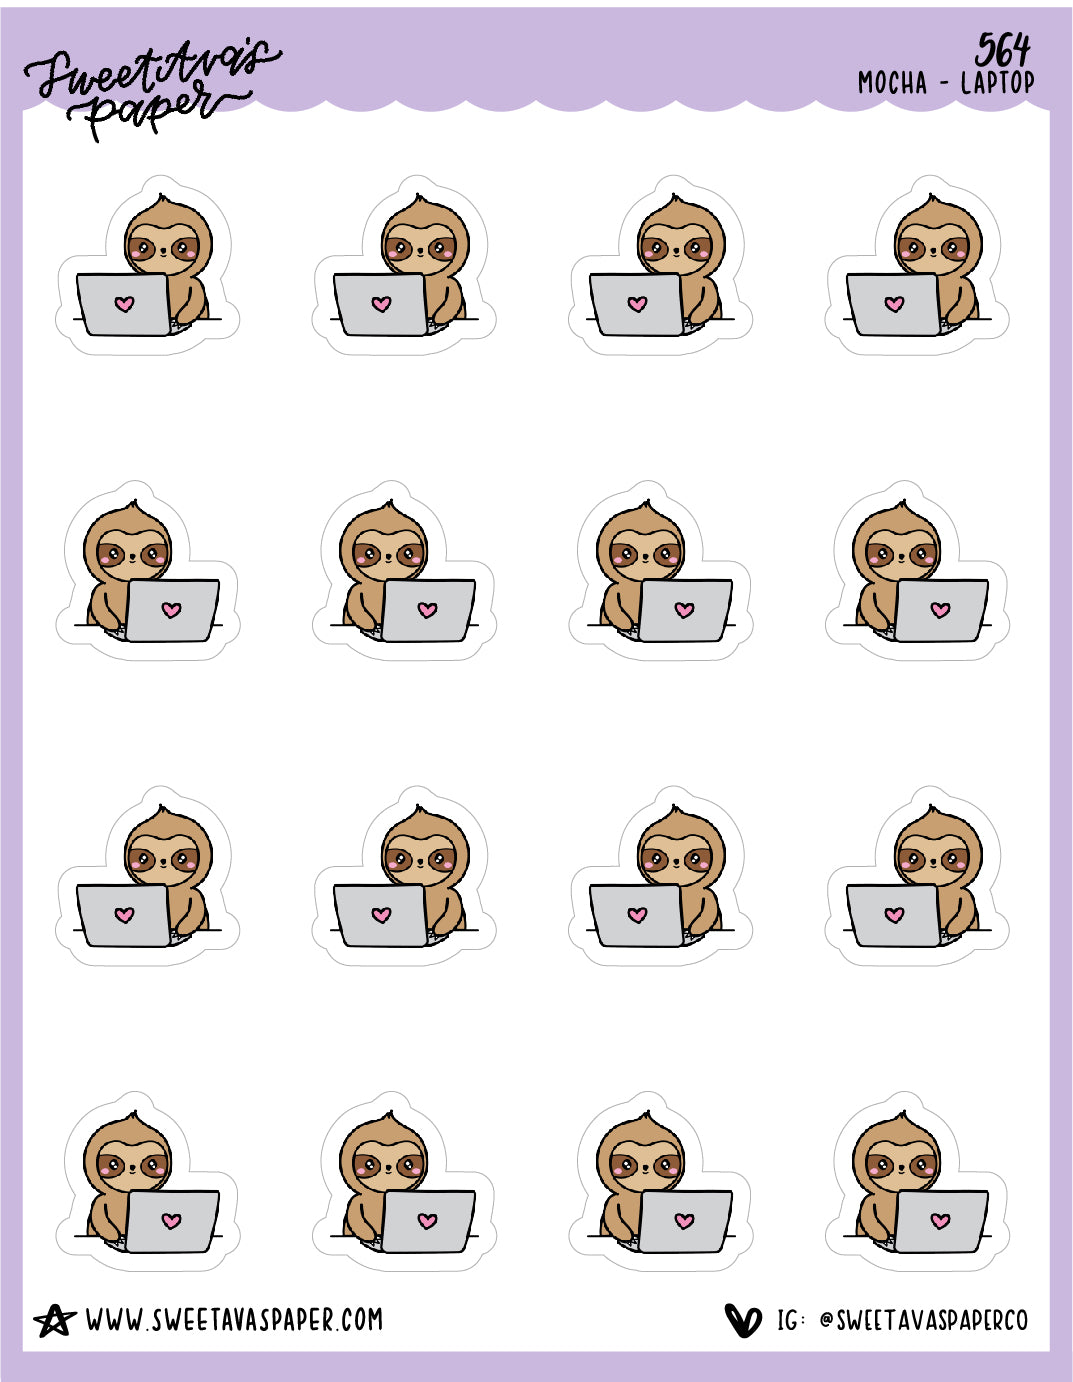 Laptop Planner Stickers - Mocha The Sloth [564]